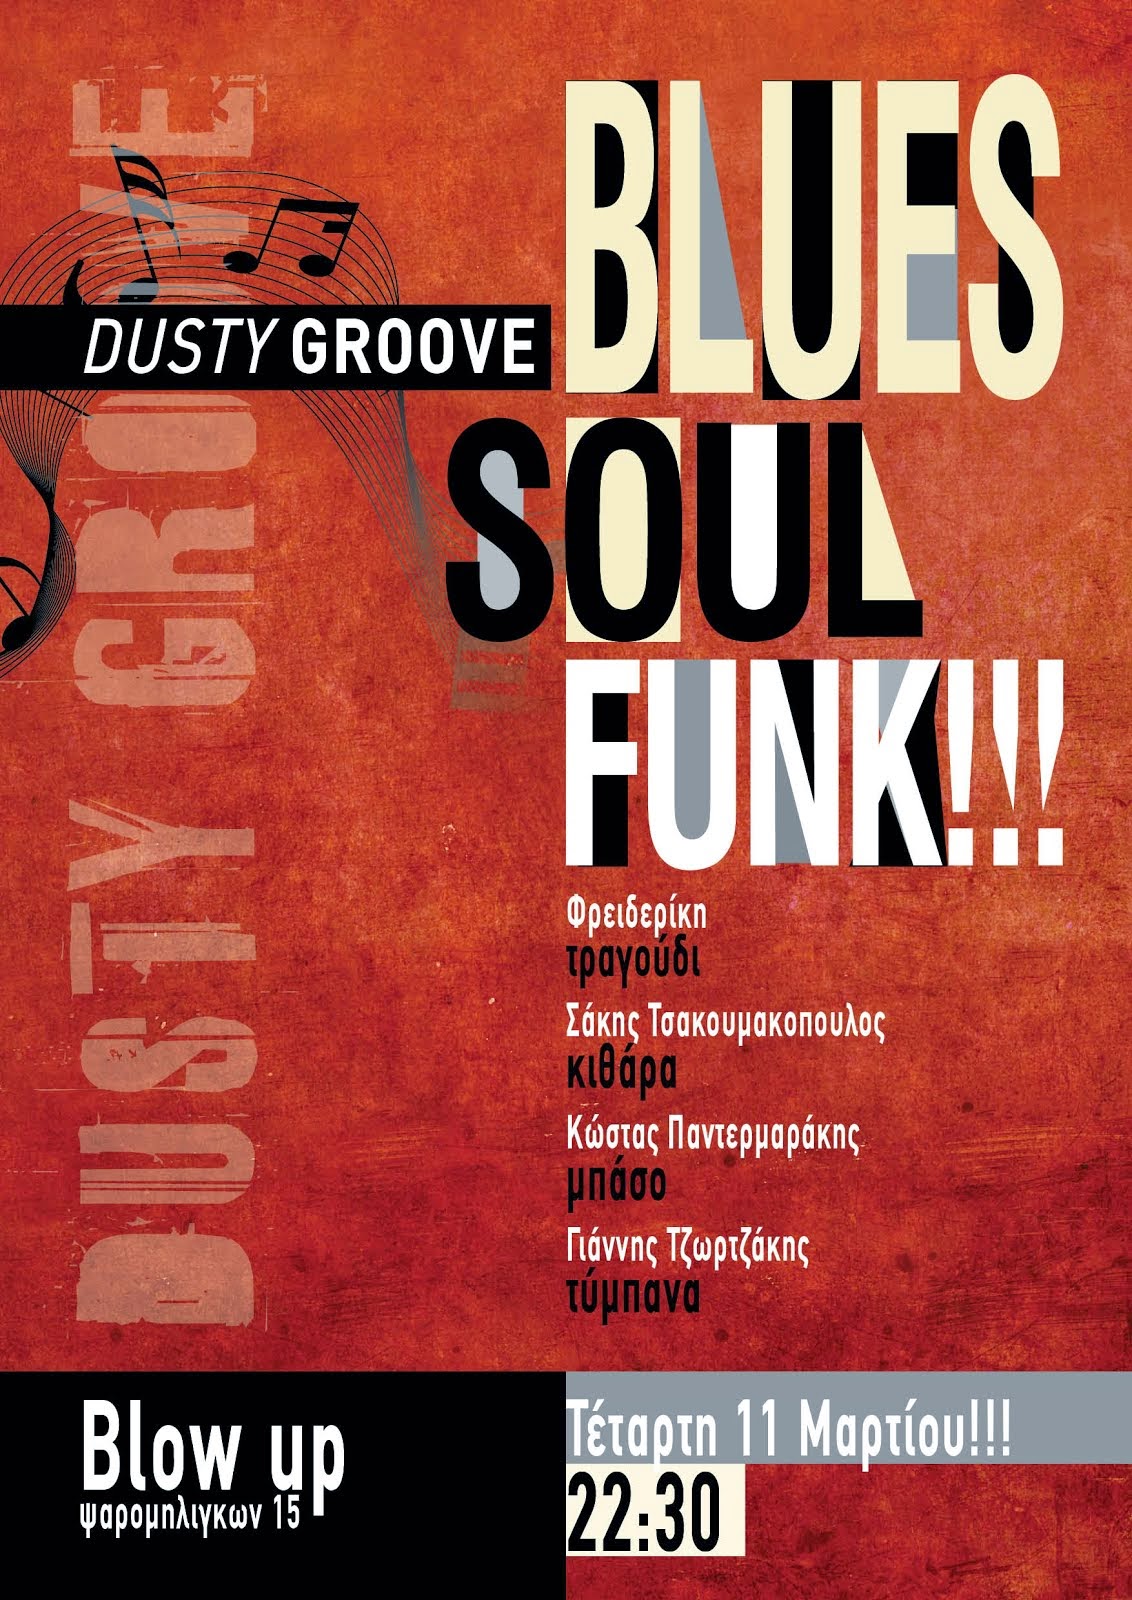 Dusty groove